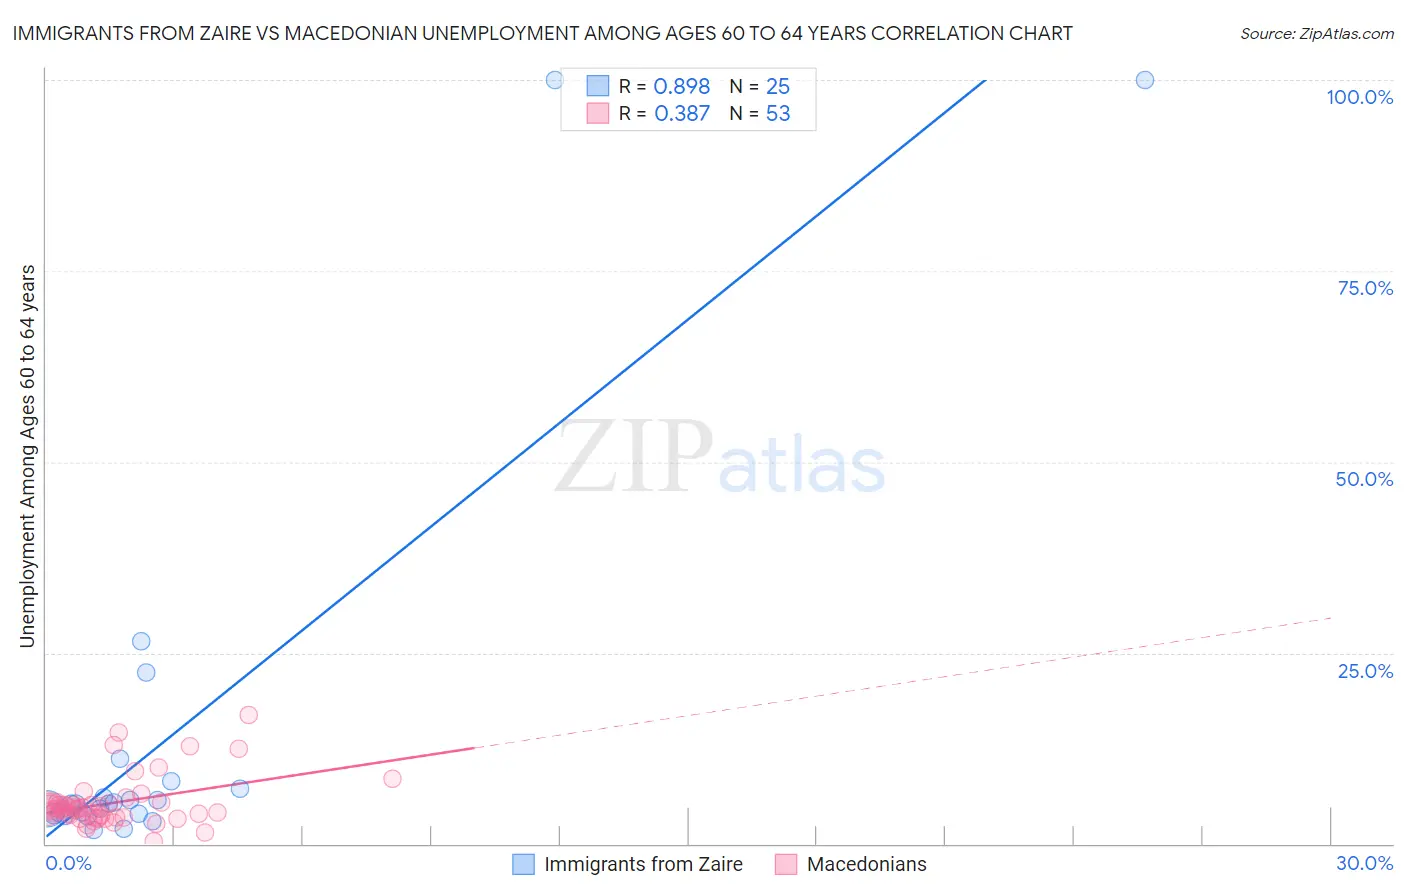 Immigrants from Zaire vs Macedonian Unemployment Among Ages 60 to 64 years